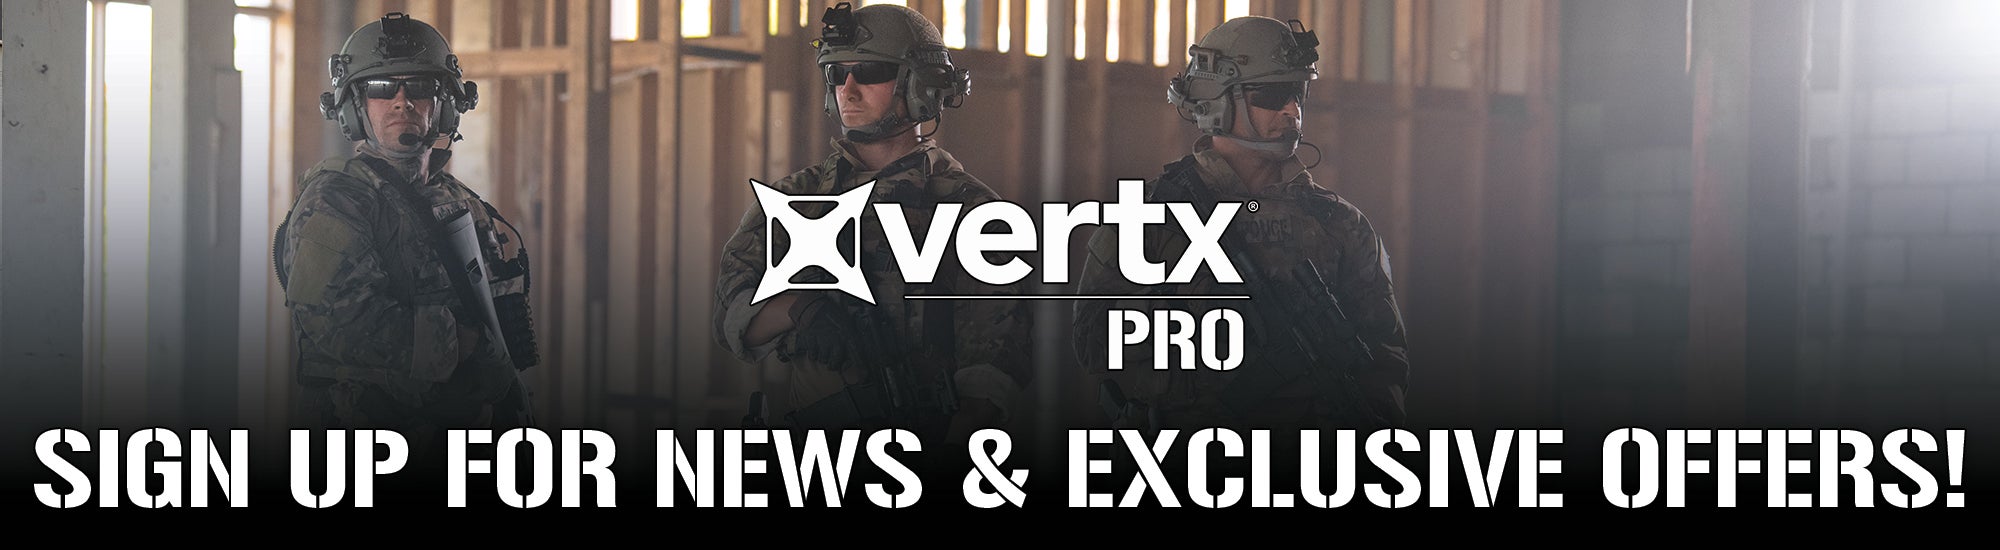 Vertx Pro Sign Up for News and Exclusive Offers